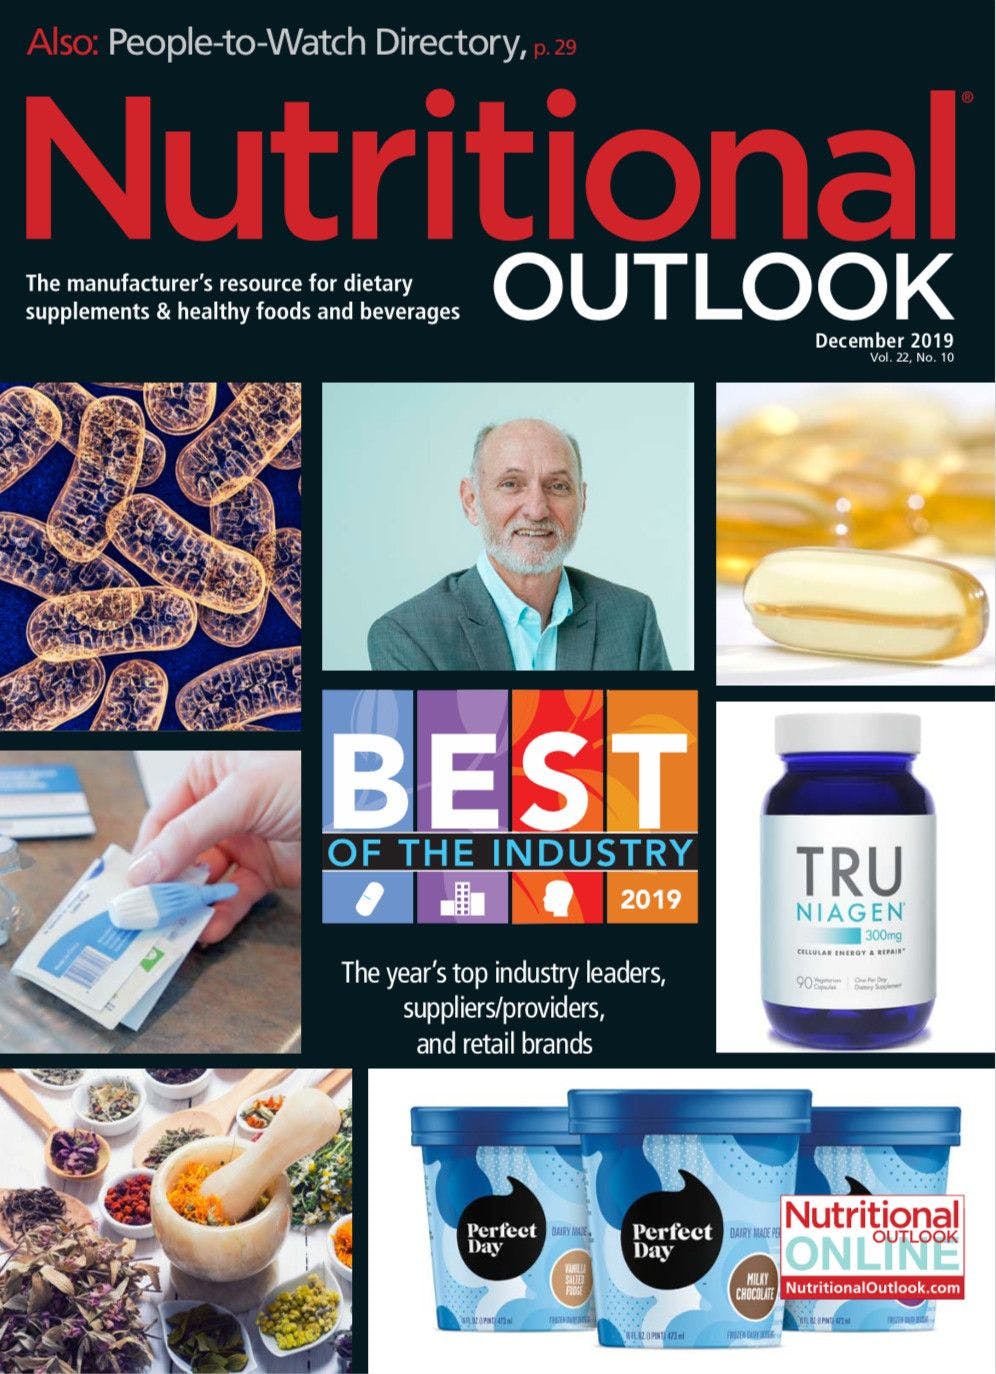 Nutritional Outlook Vol. 22 No. 10